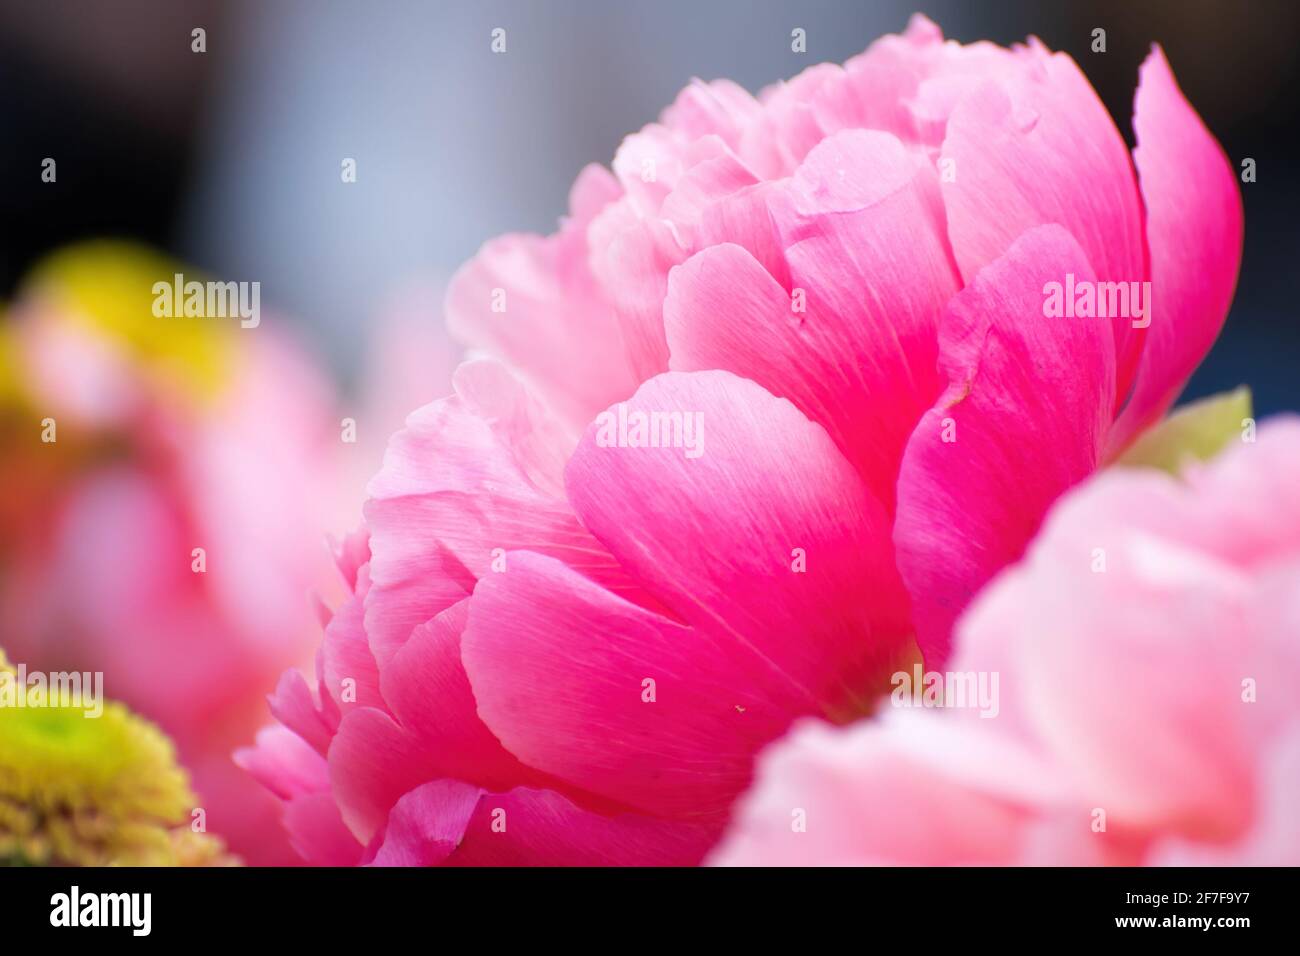 Bright beautiful floral arrangement of pink pion flowers close-up. Stock Photo